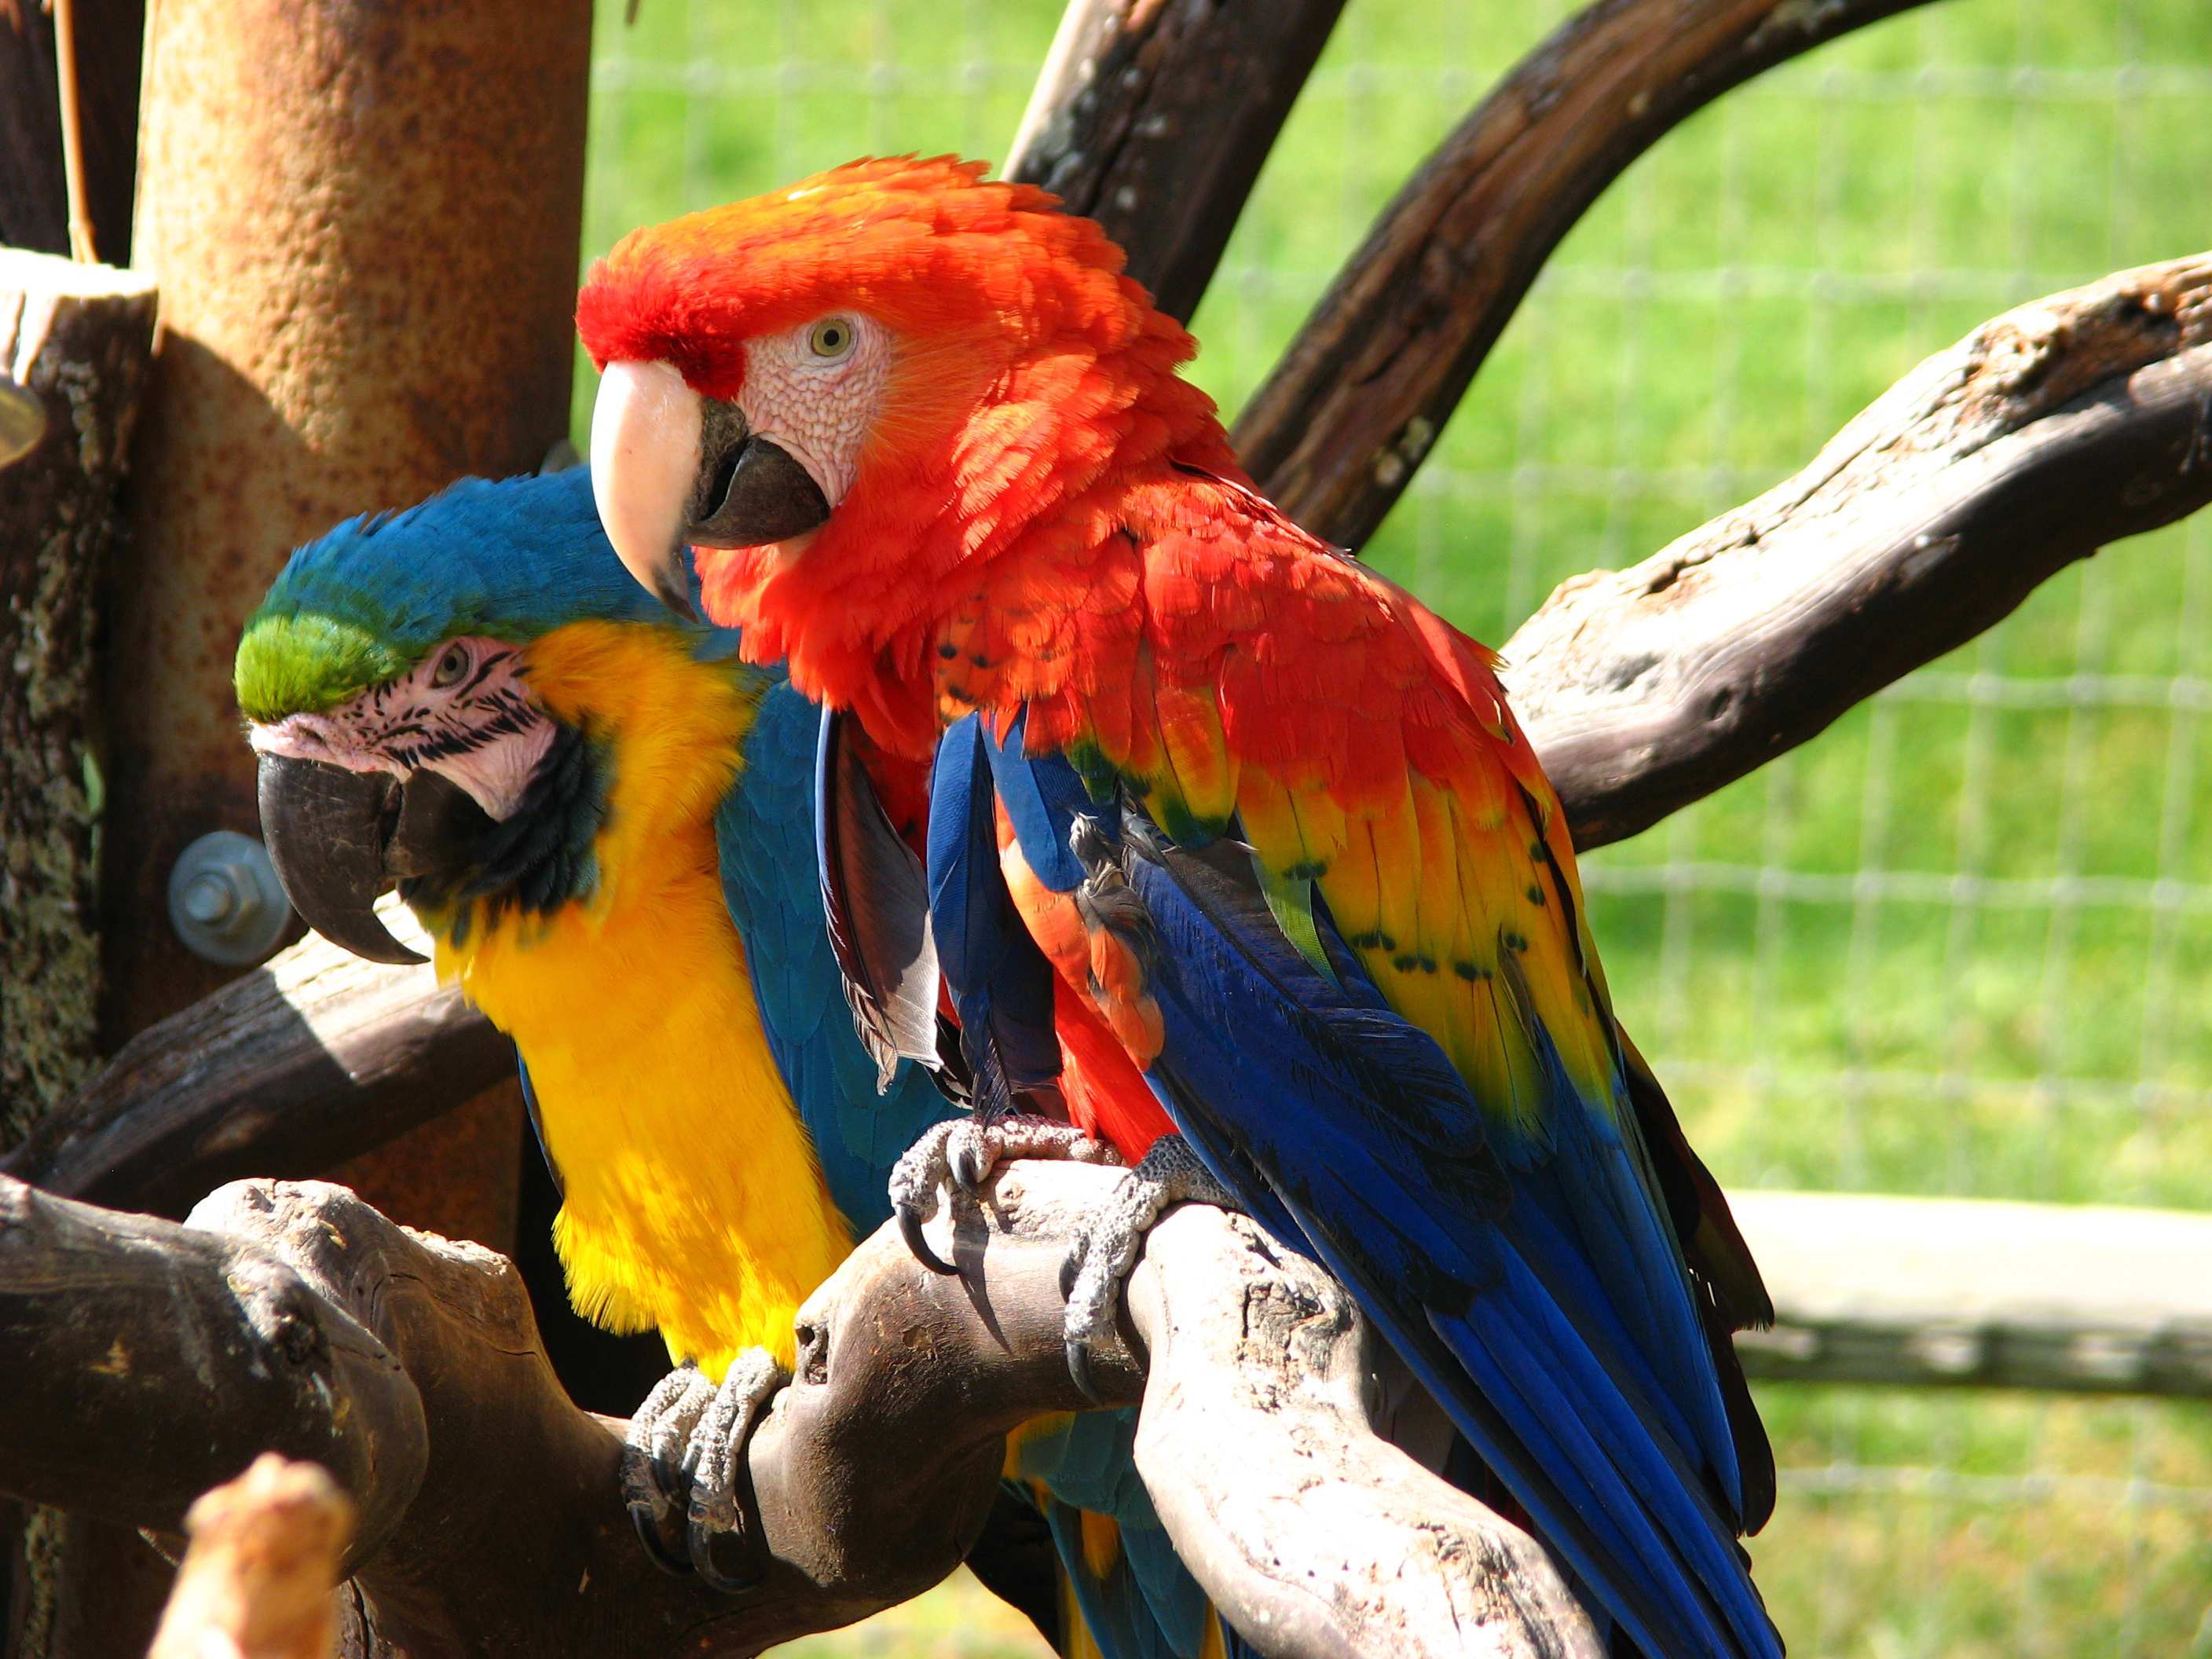 Blue+and+gold+macaw+parrots